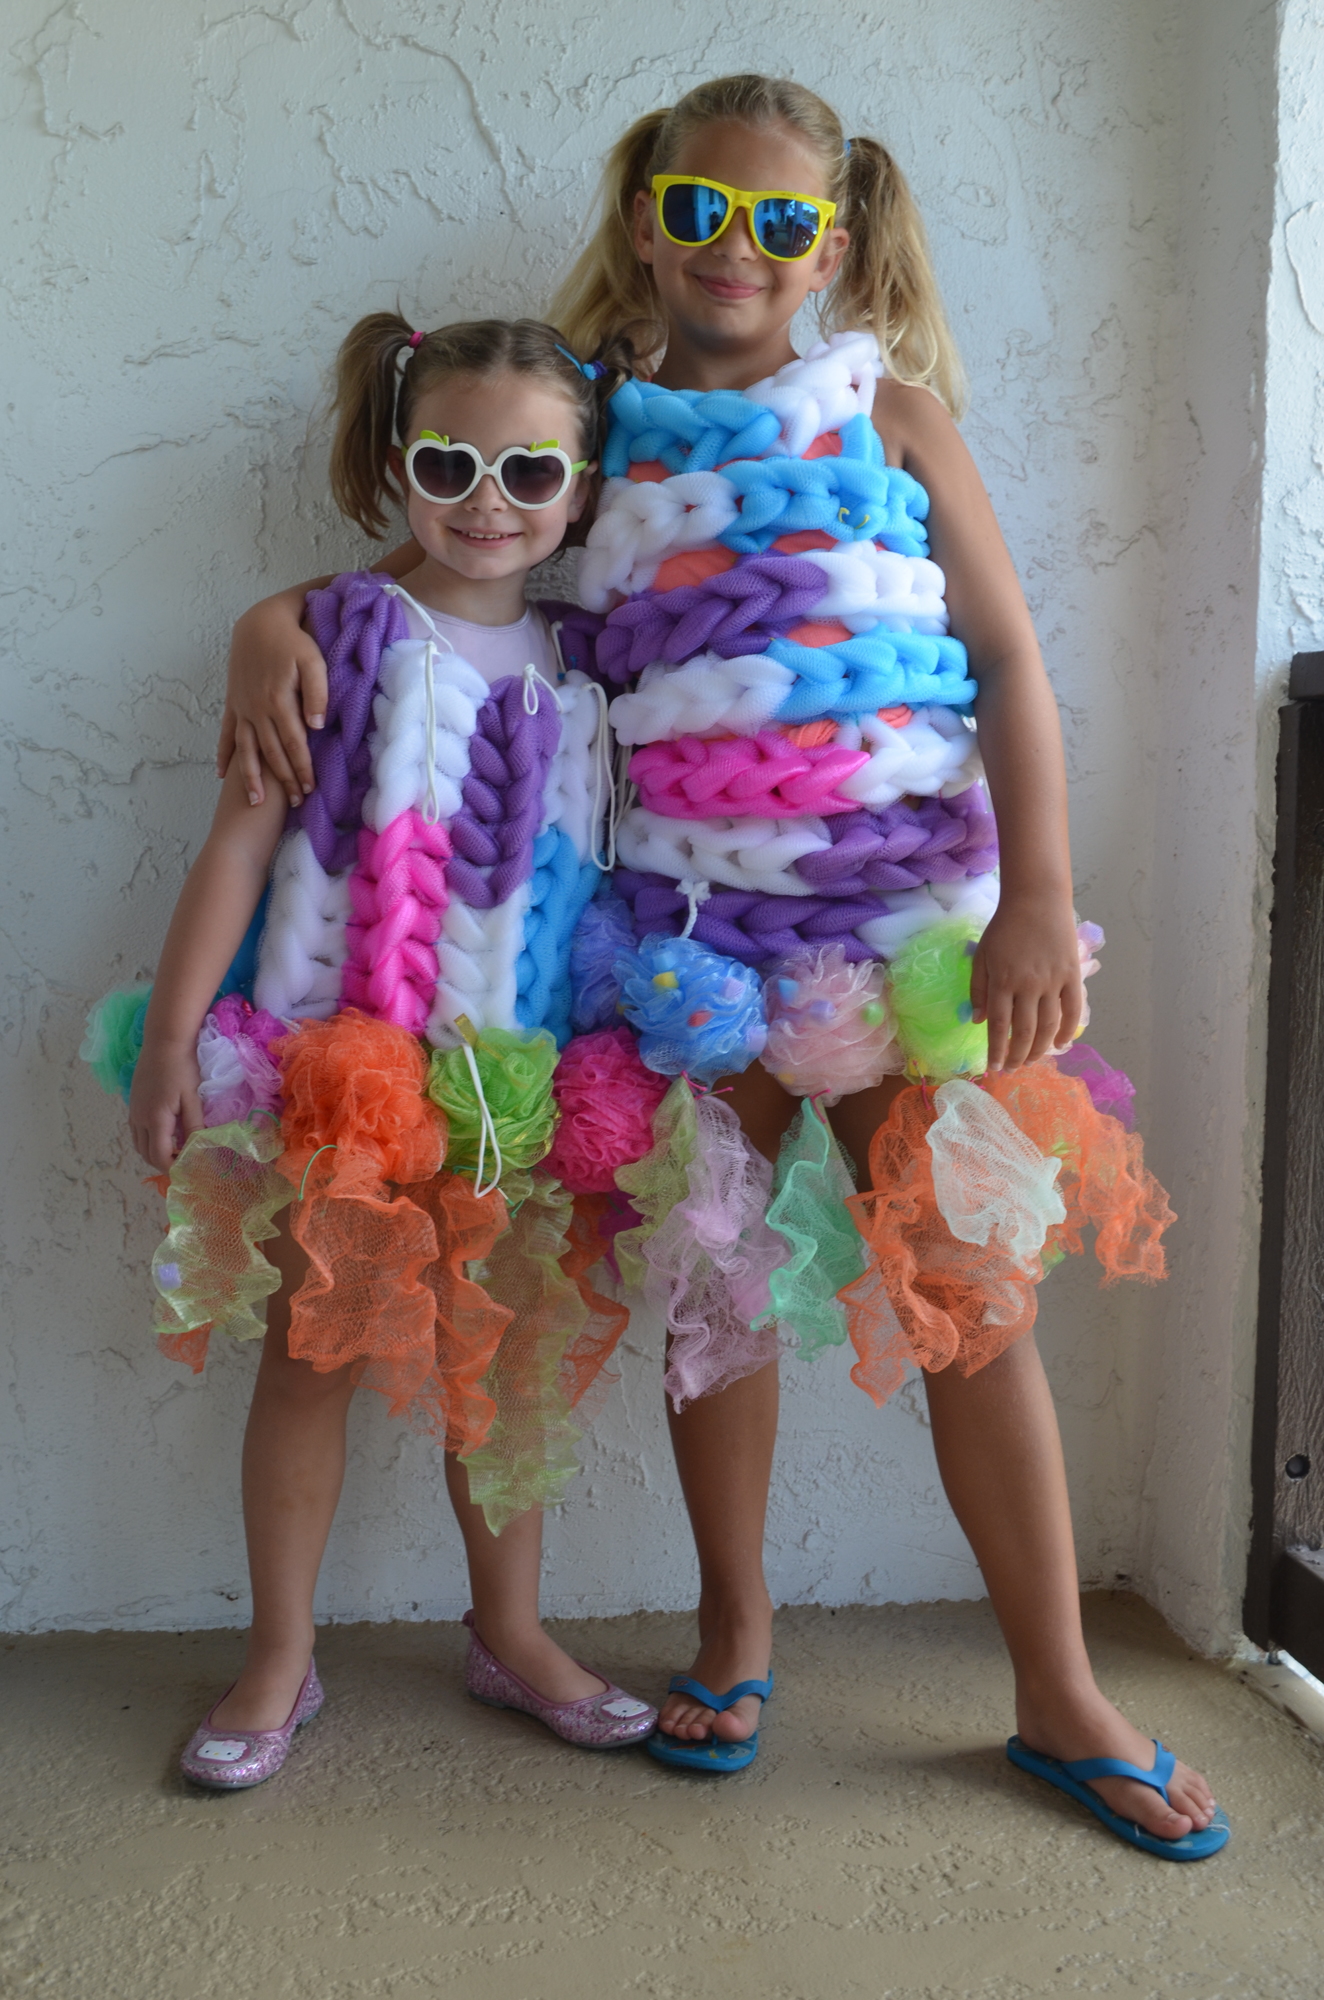 Holland,5, and Cambelle, 9, Anders model Cambelle’s loofah dresses at the iconcept jr. photoshoot. Photo by Niki Kottmann.